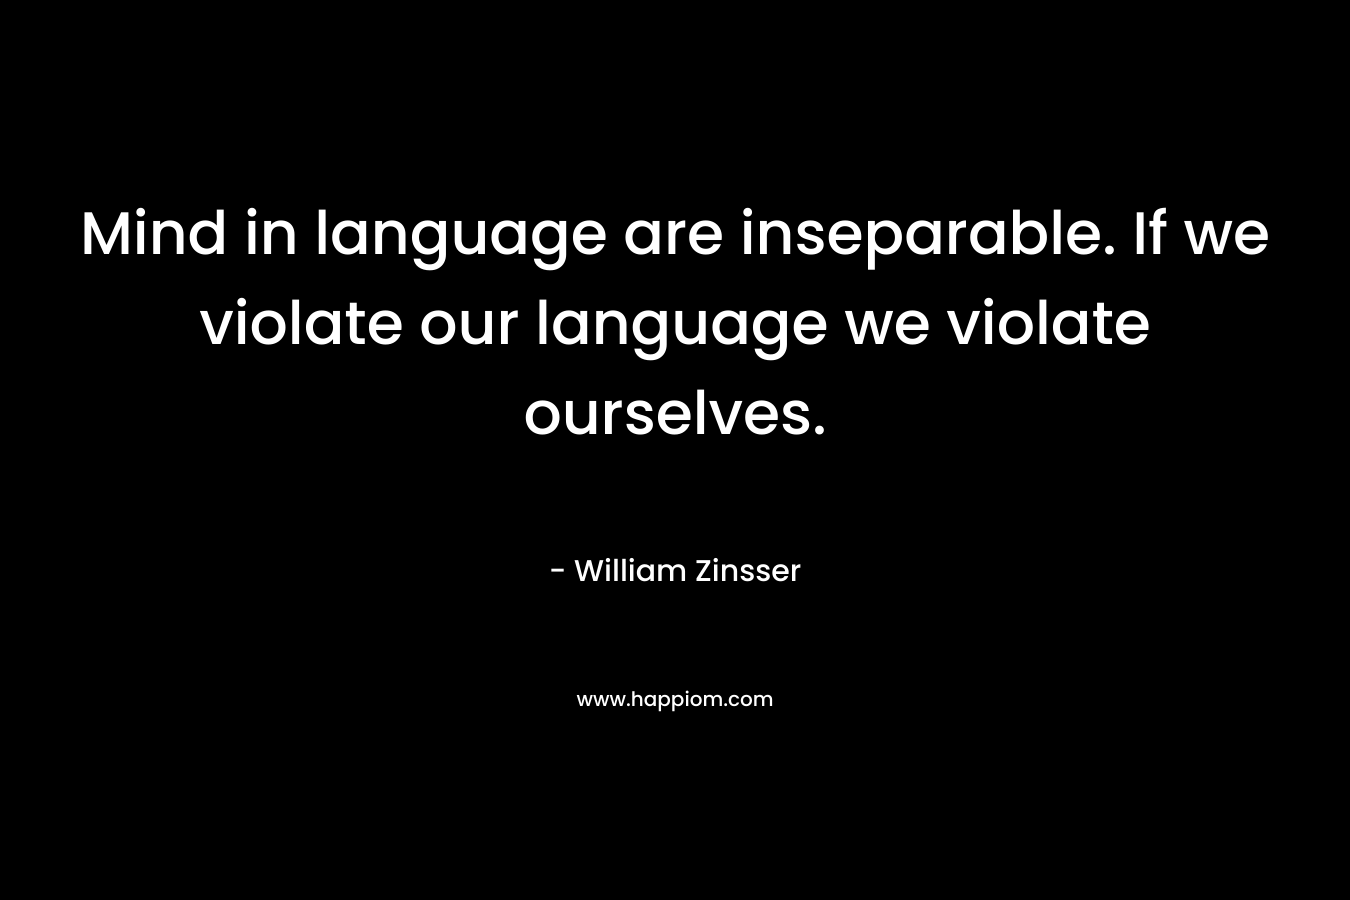 Mind in language are inseparable. If we violate our language we violate ourselves.